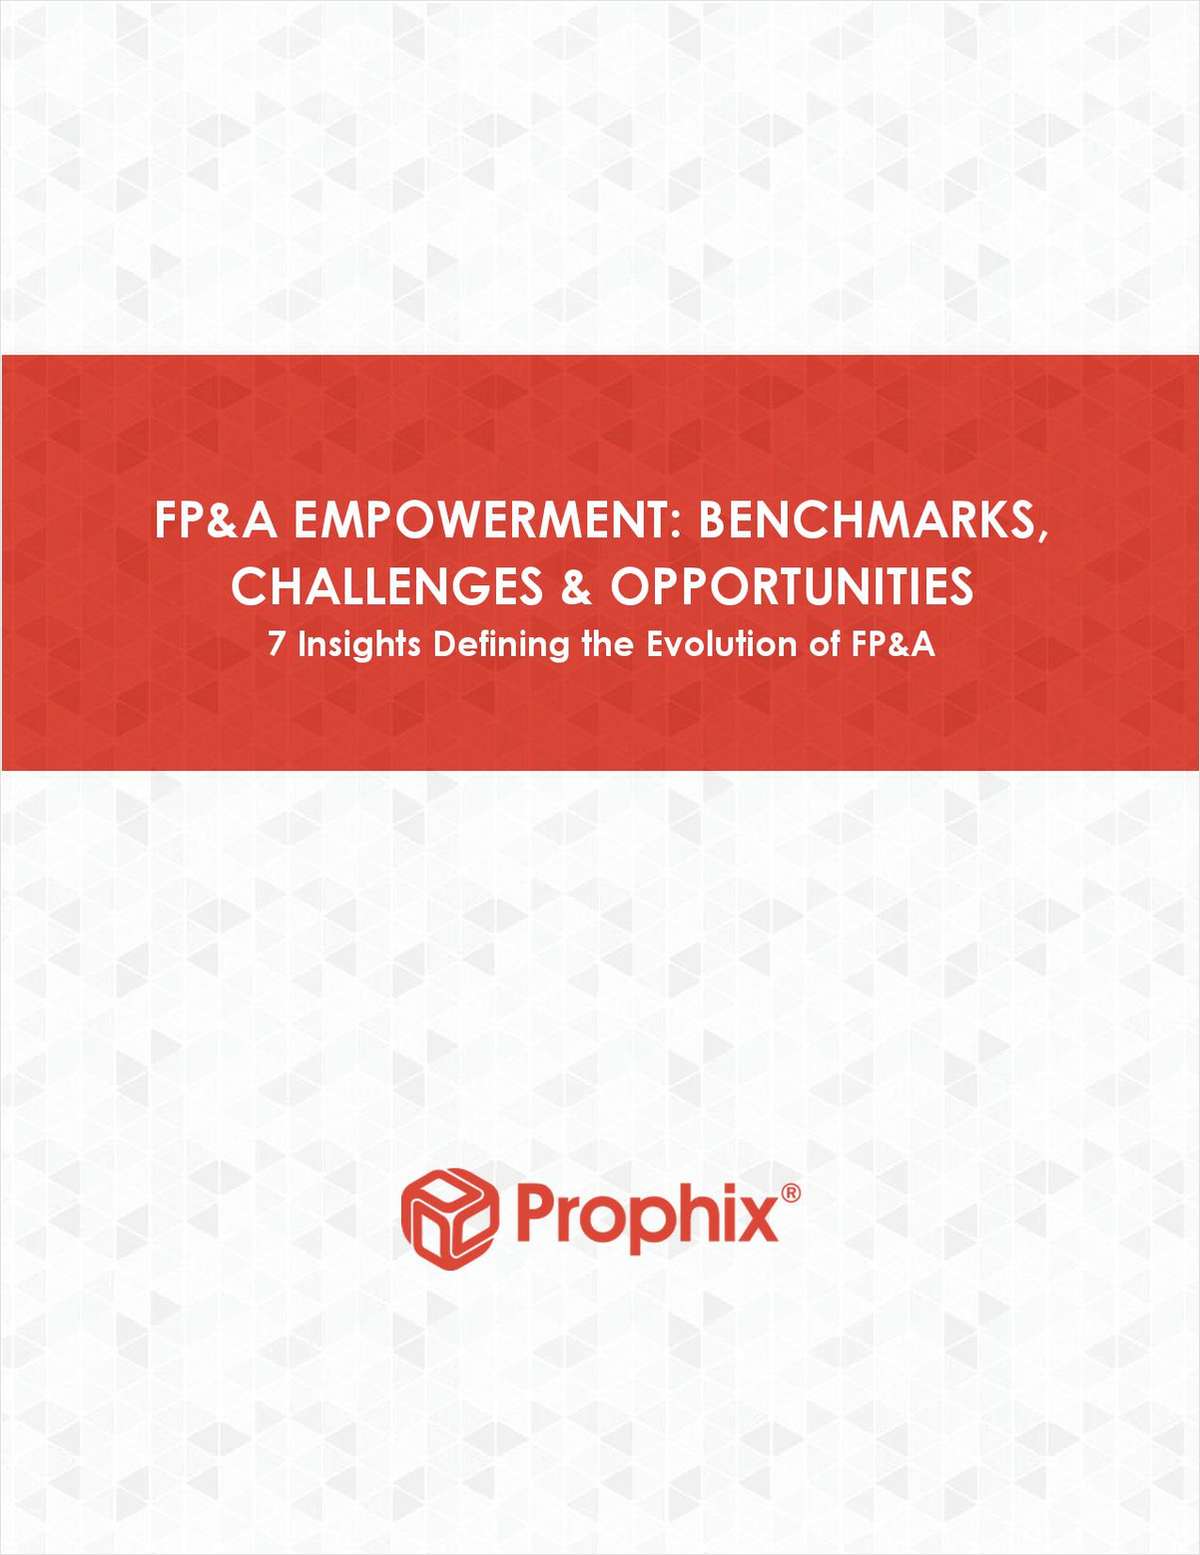 FP&A Empowerment: Benchmarks, Challenges & Opportunities